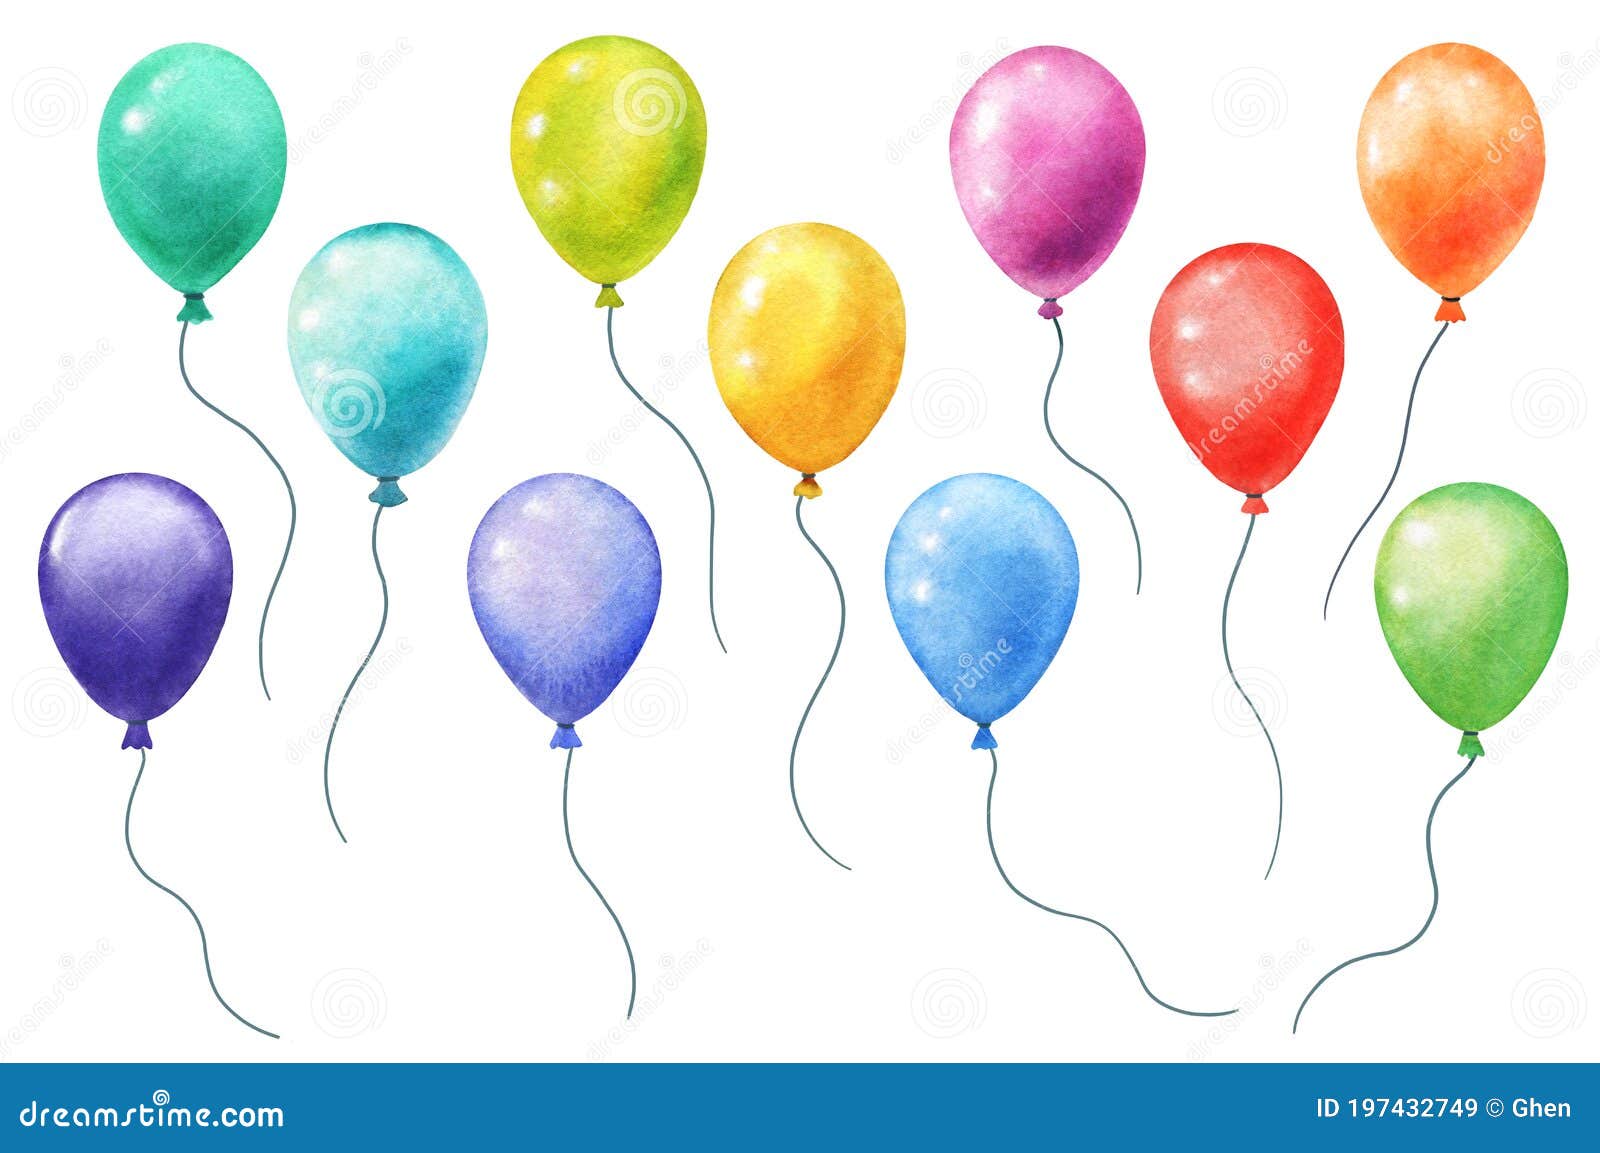 watercolor balloons on white. hand panted separate balloons with bright various colors